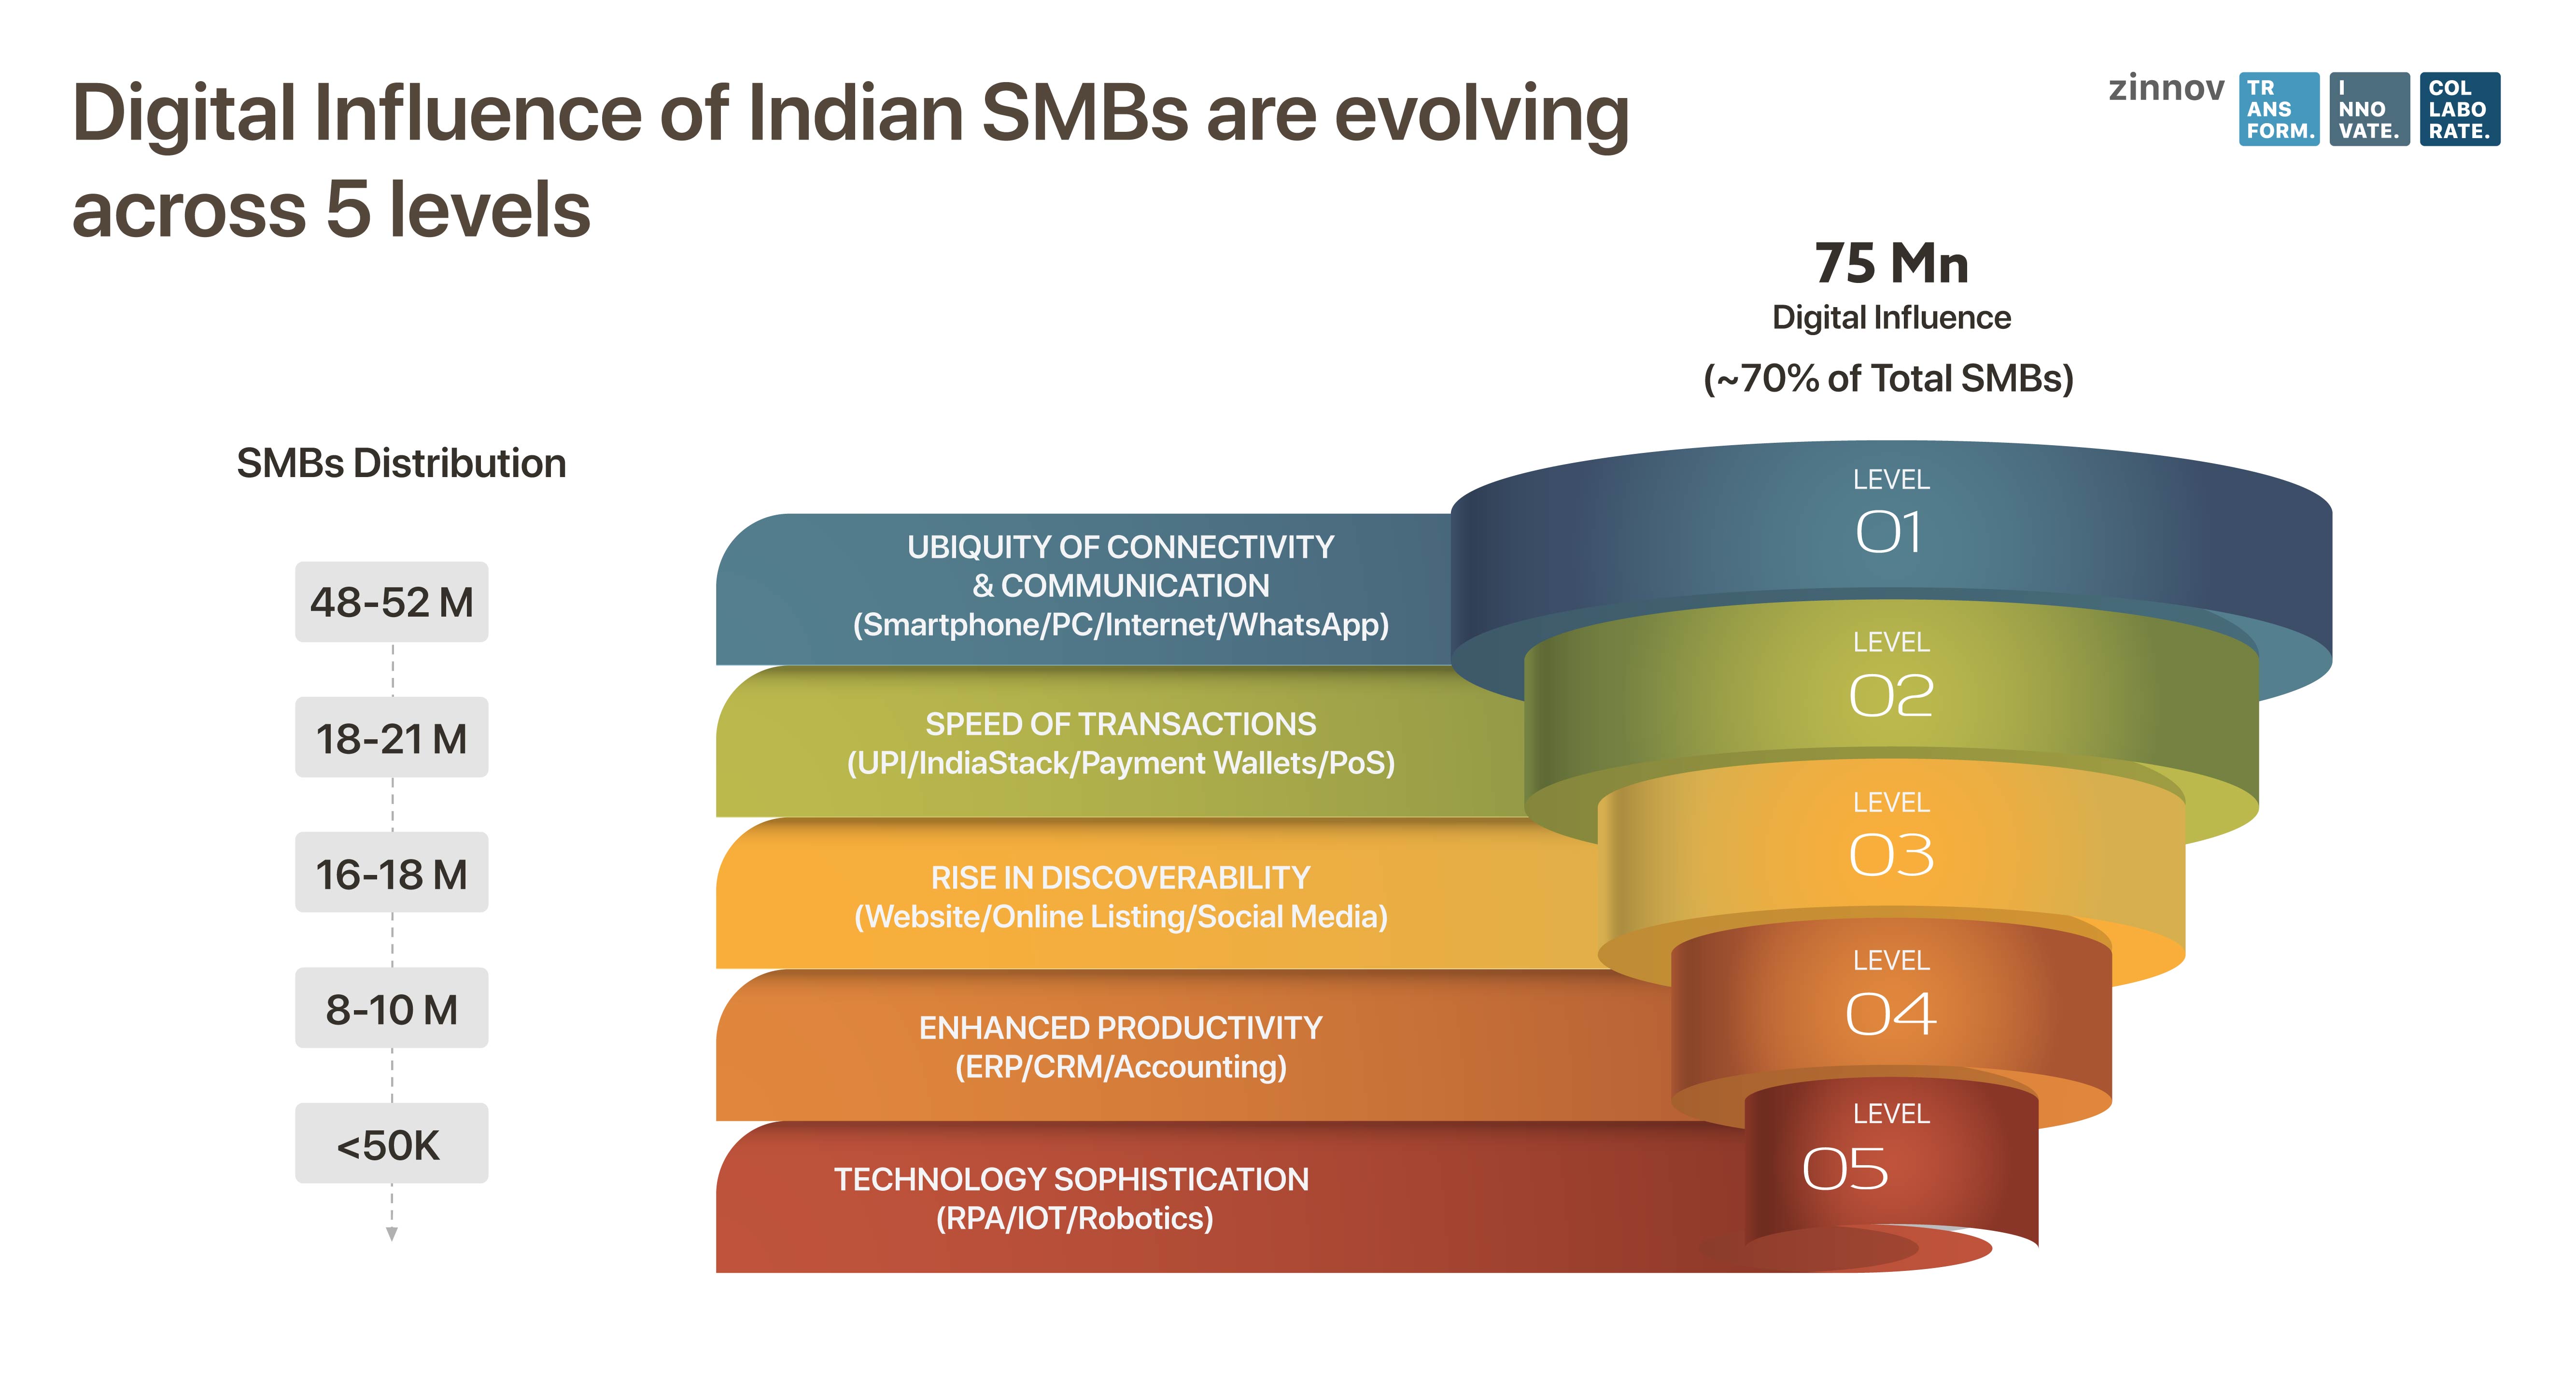 Digital influence of Indian SMBs across 5 levels